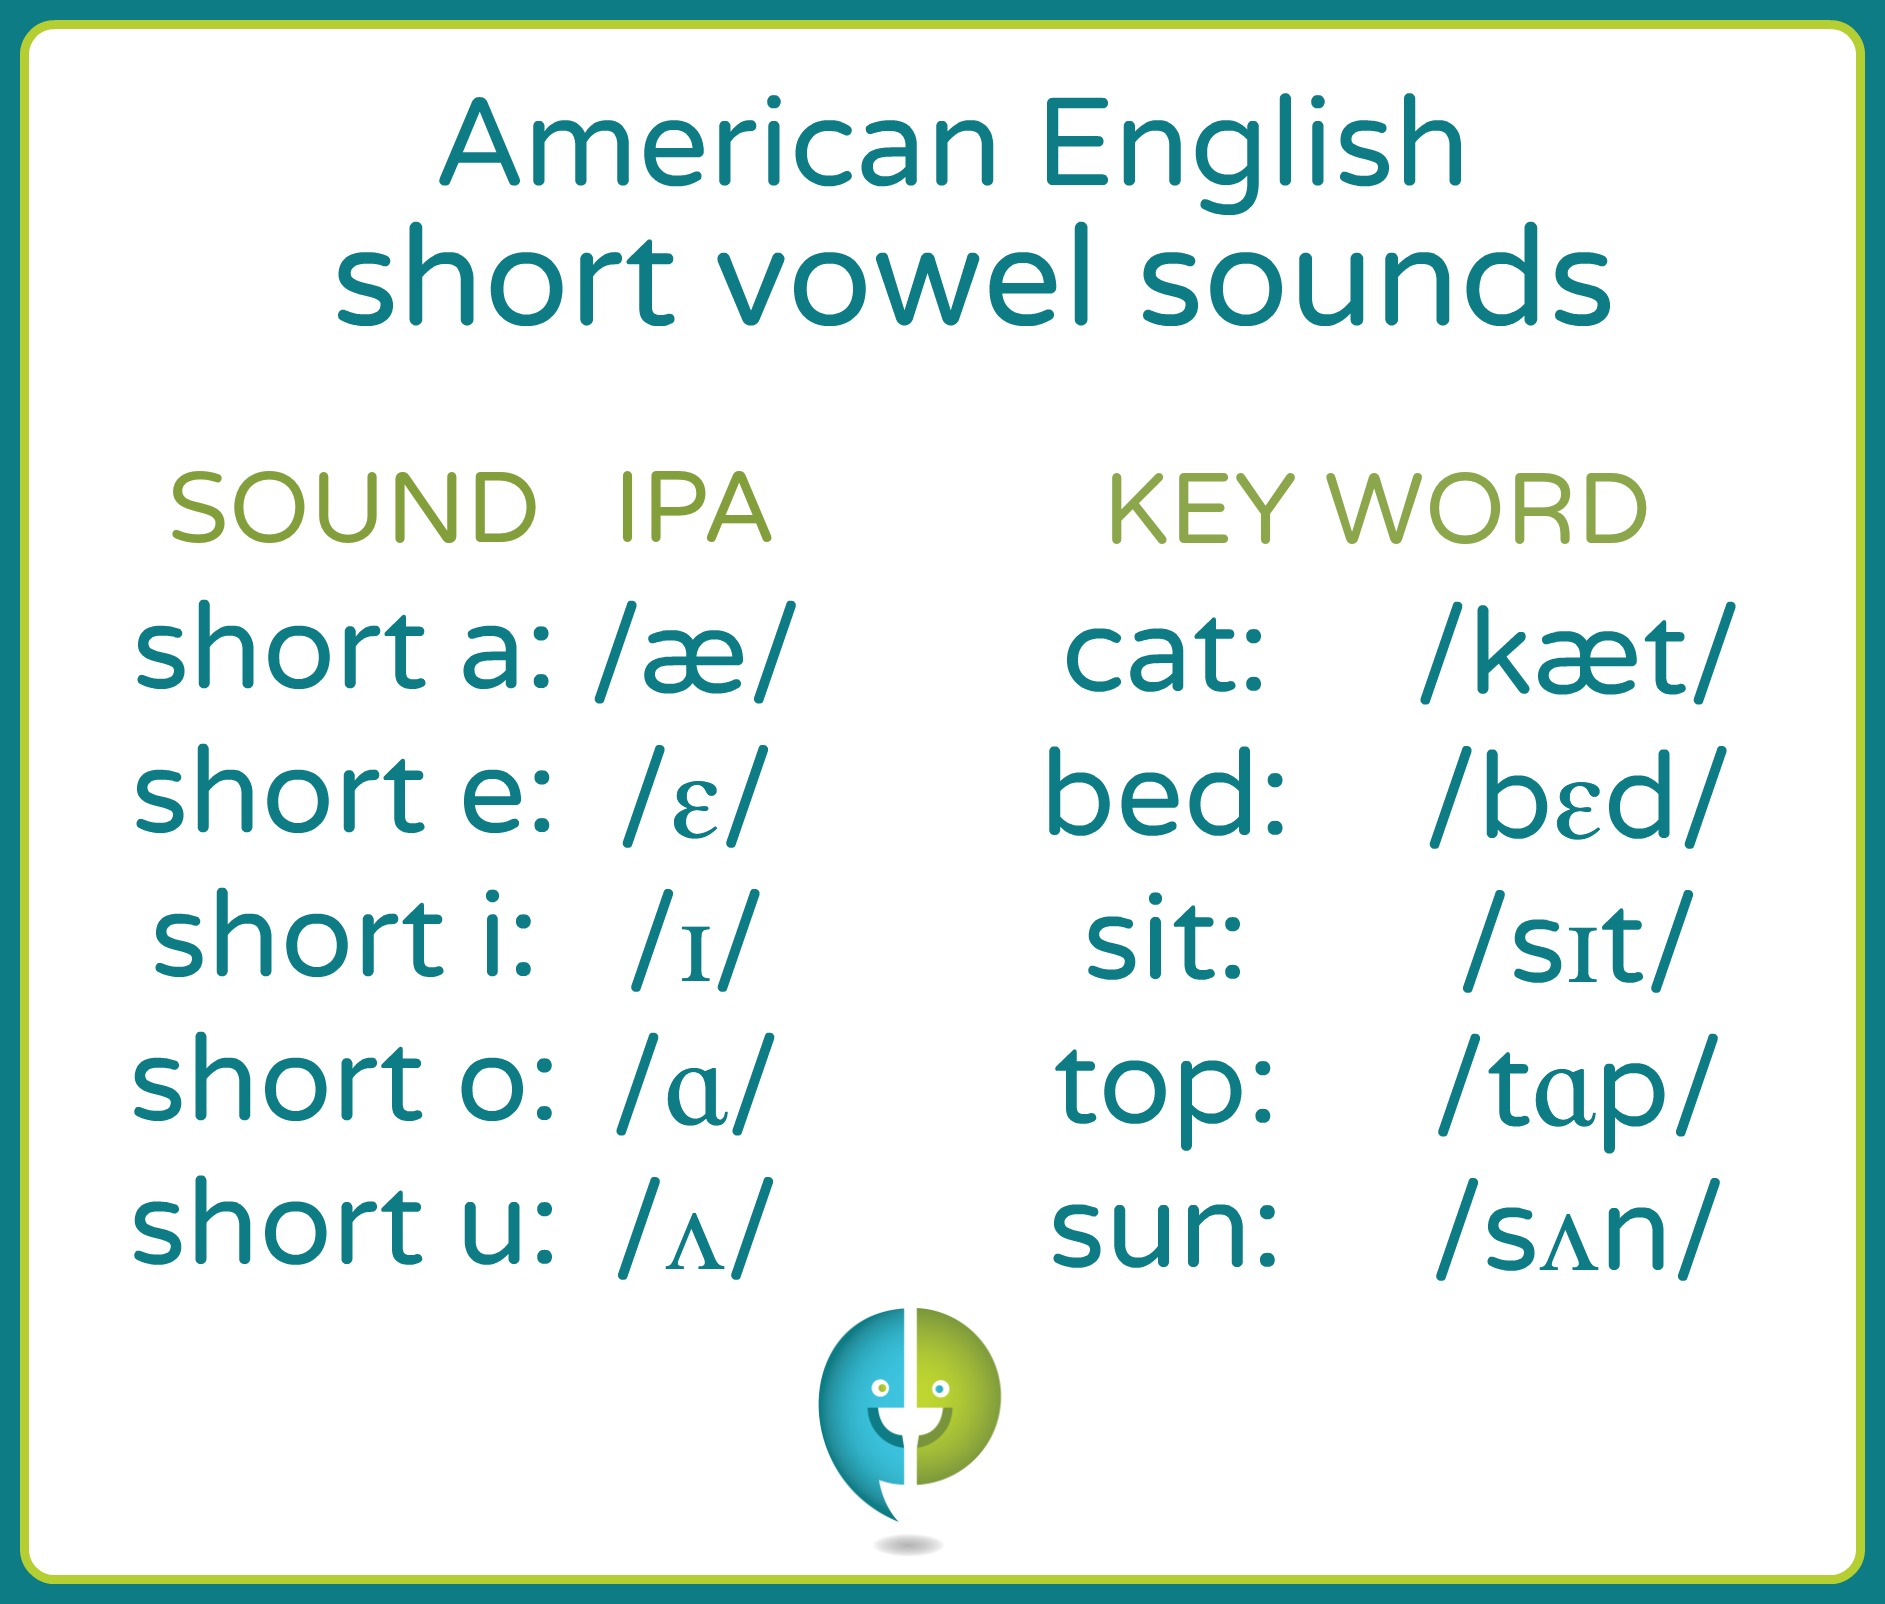 Long vowels sounds examples